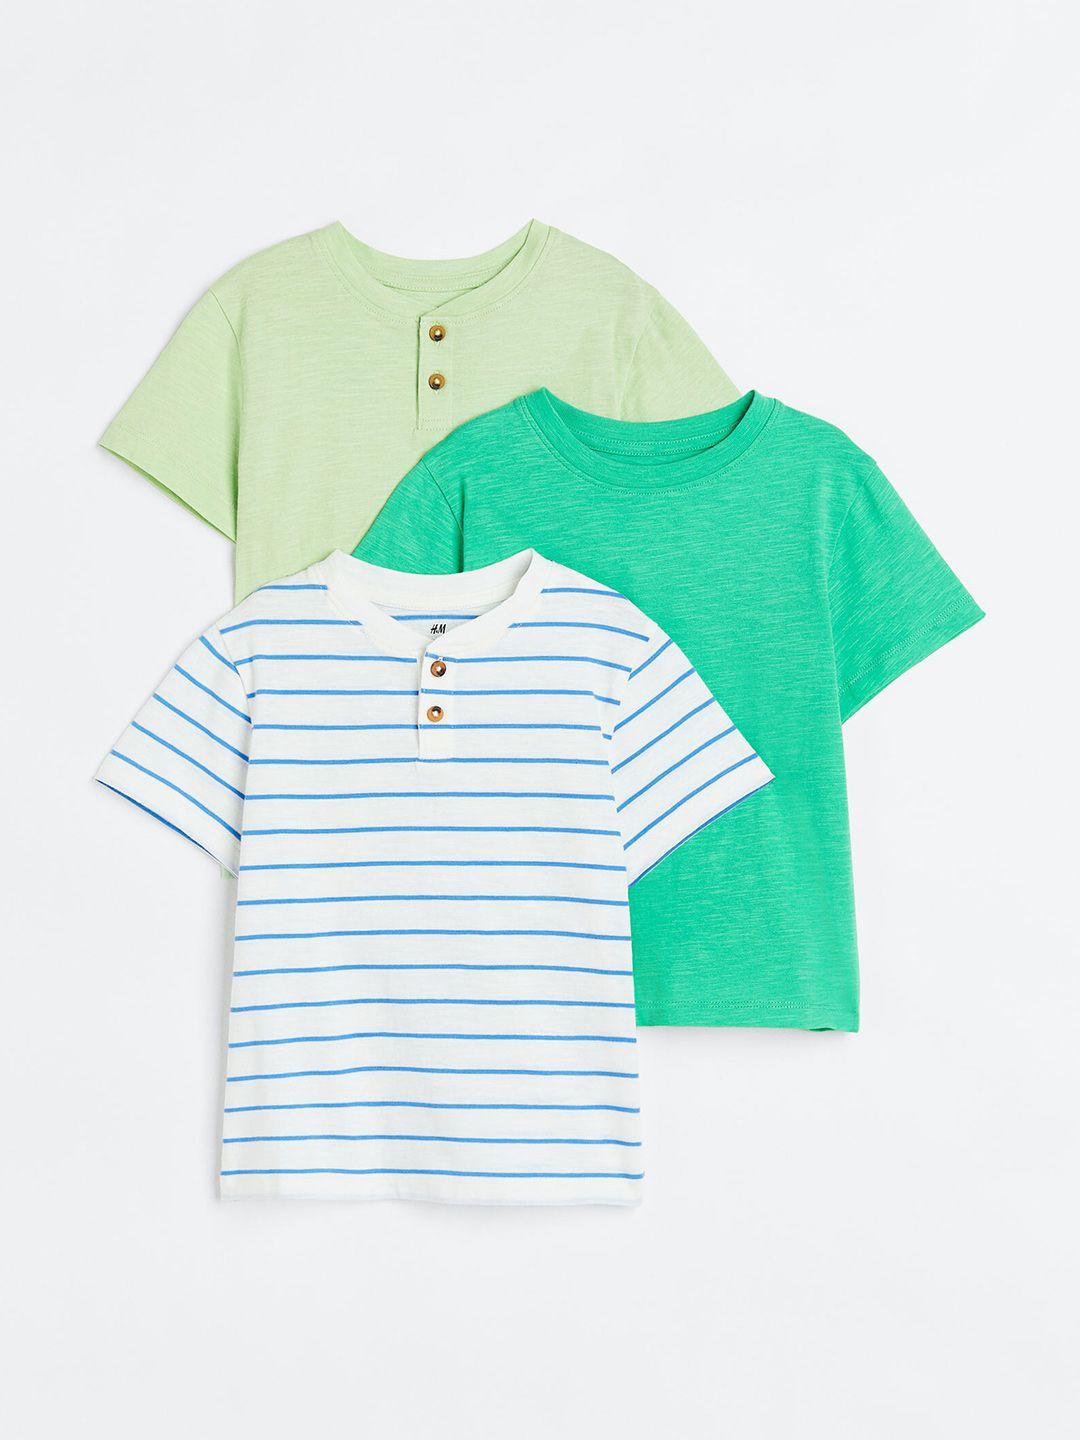 h&m boys 3-pack jersey tops